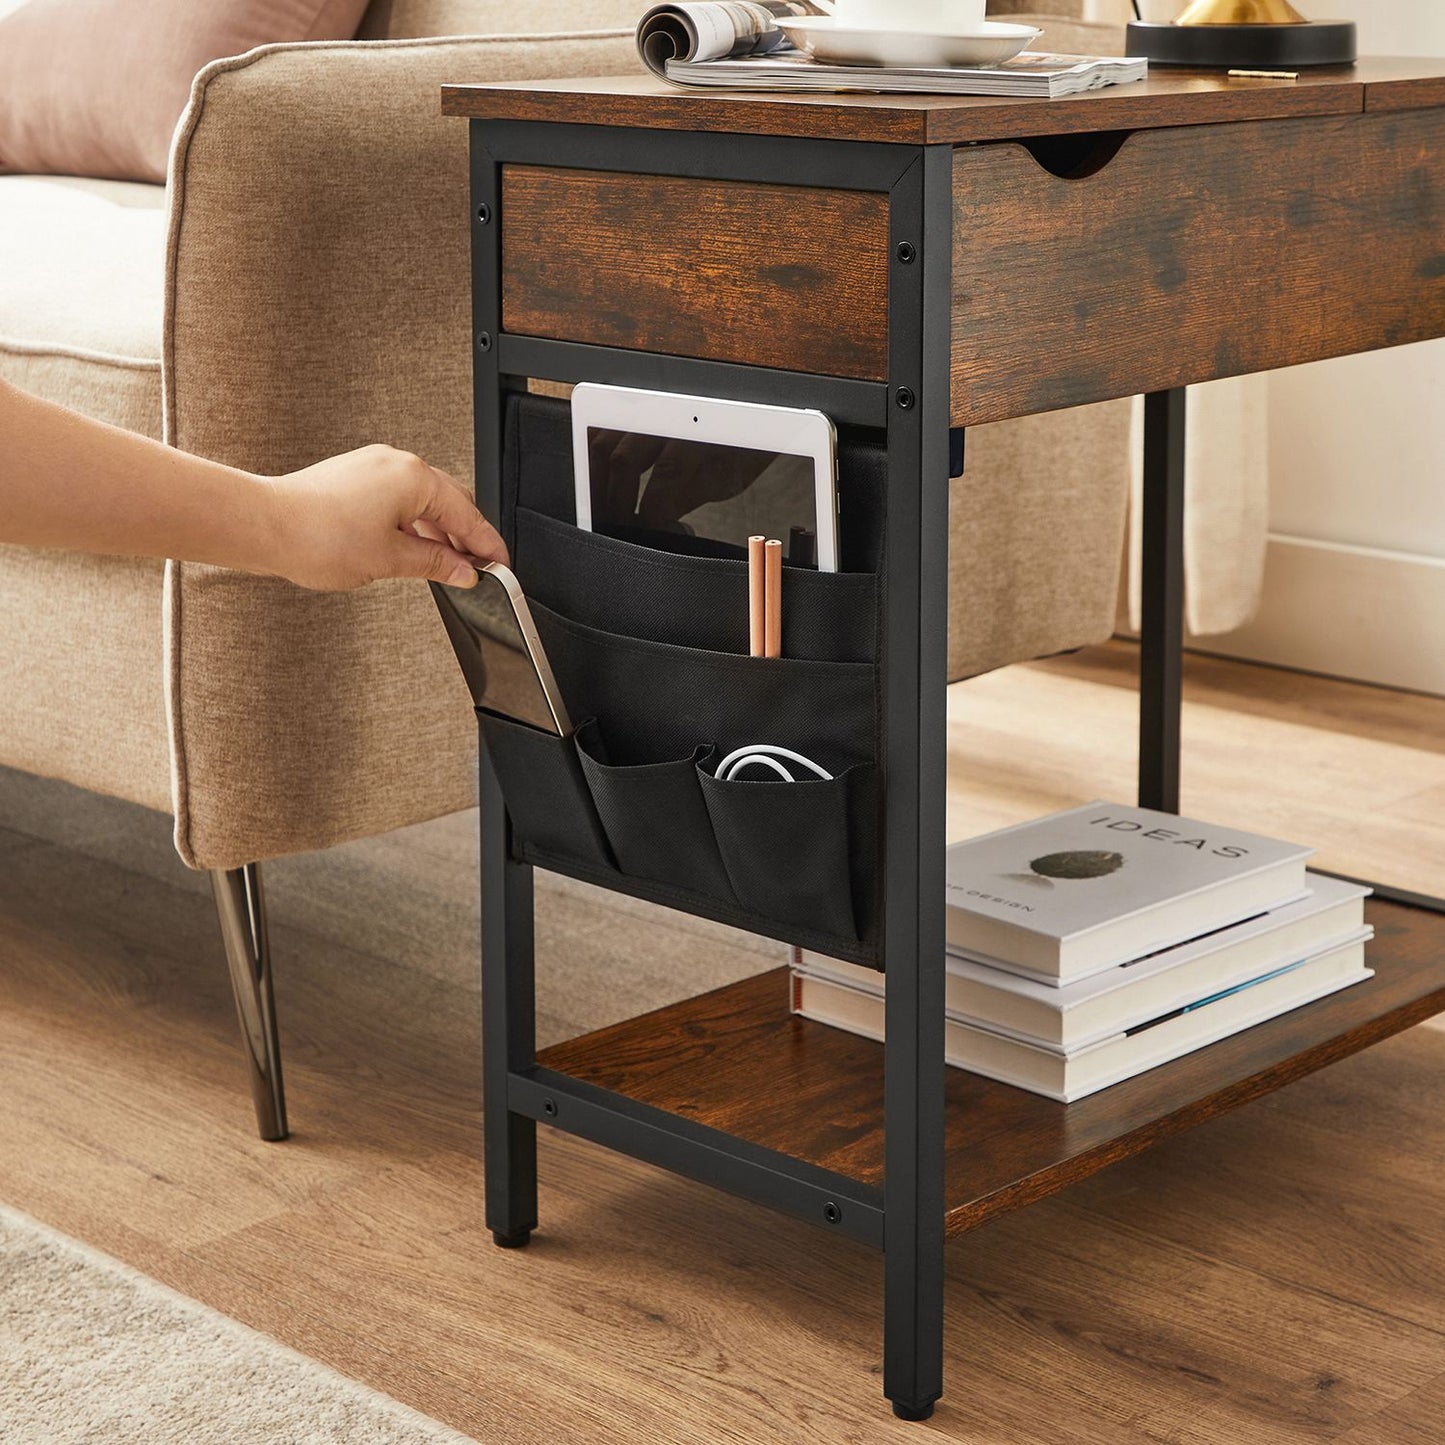 Side table with sockets